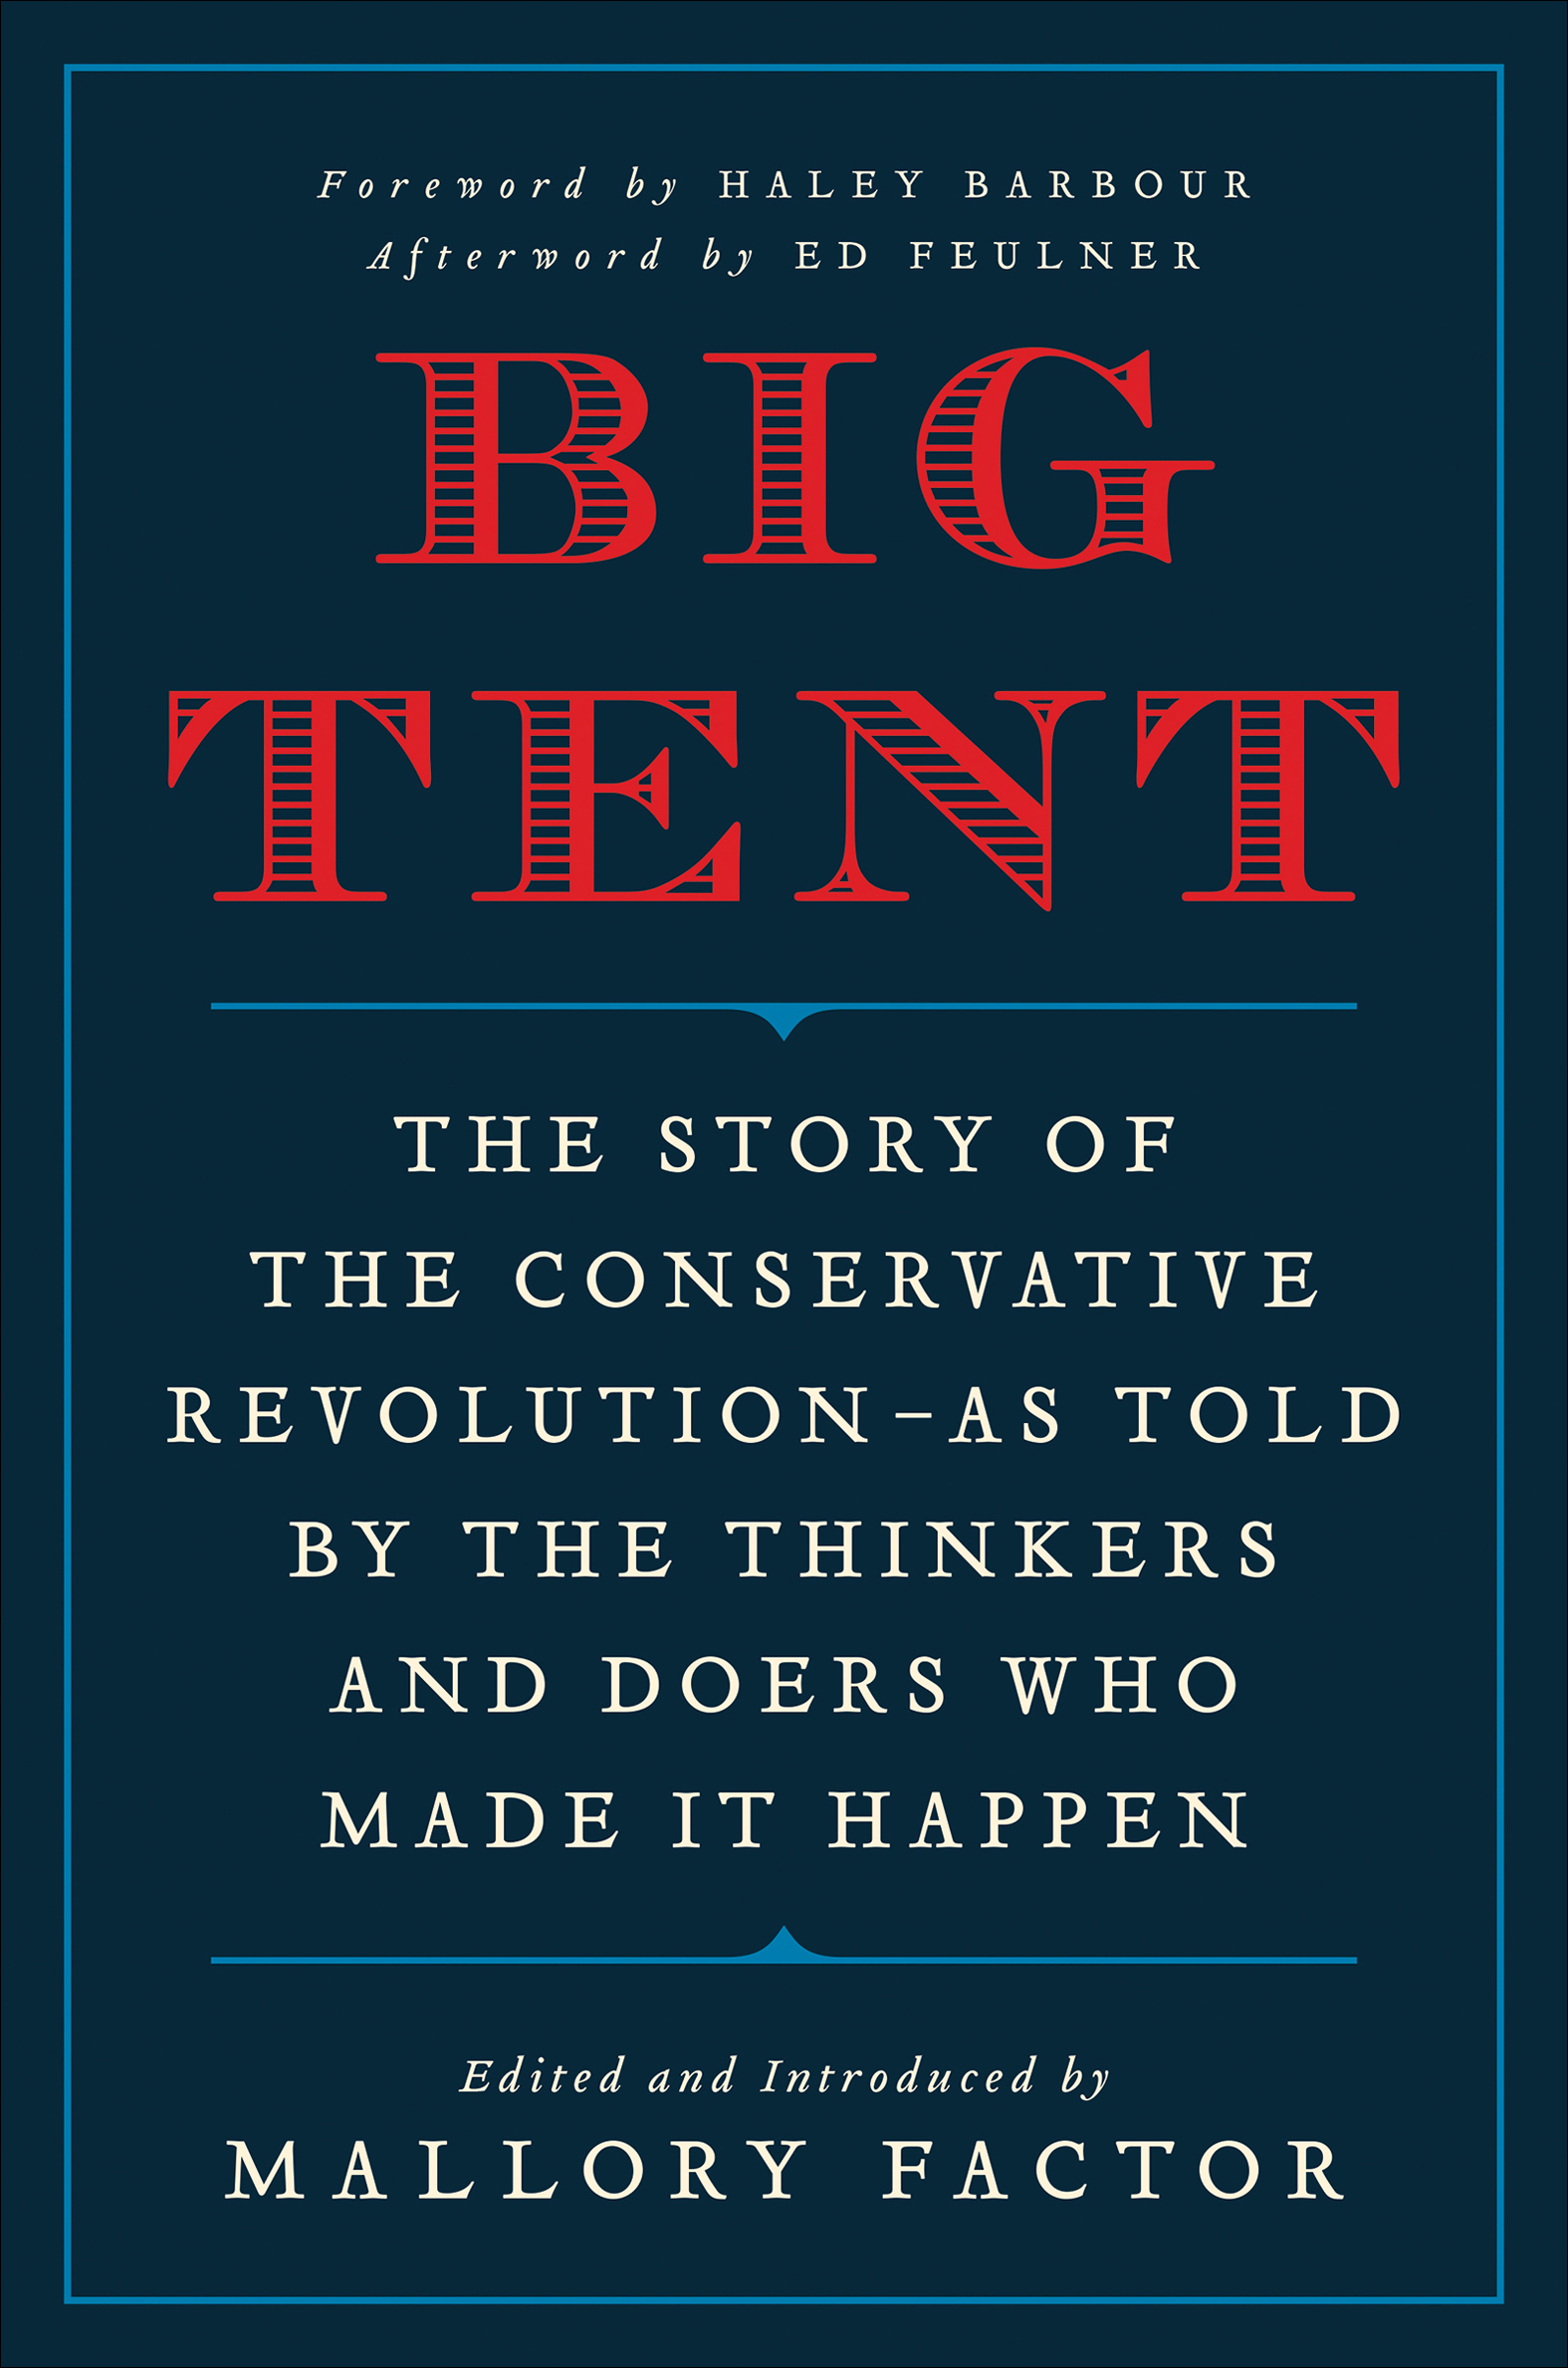 Big tent the story of the conservative revolution--as told by the thinkers and doers who made it happen cover image